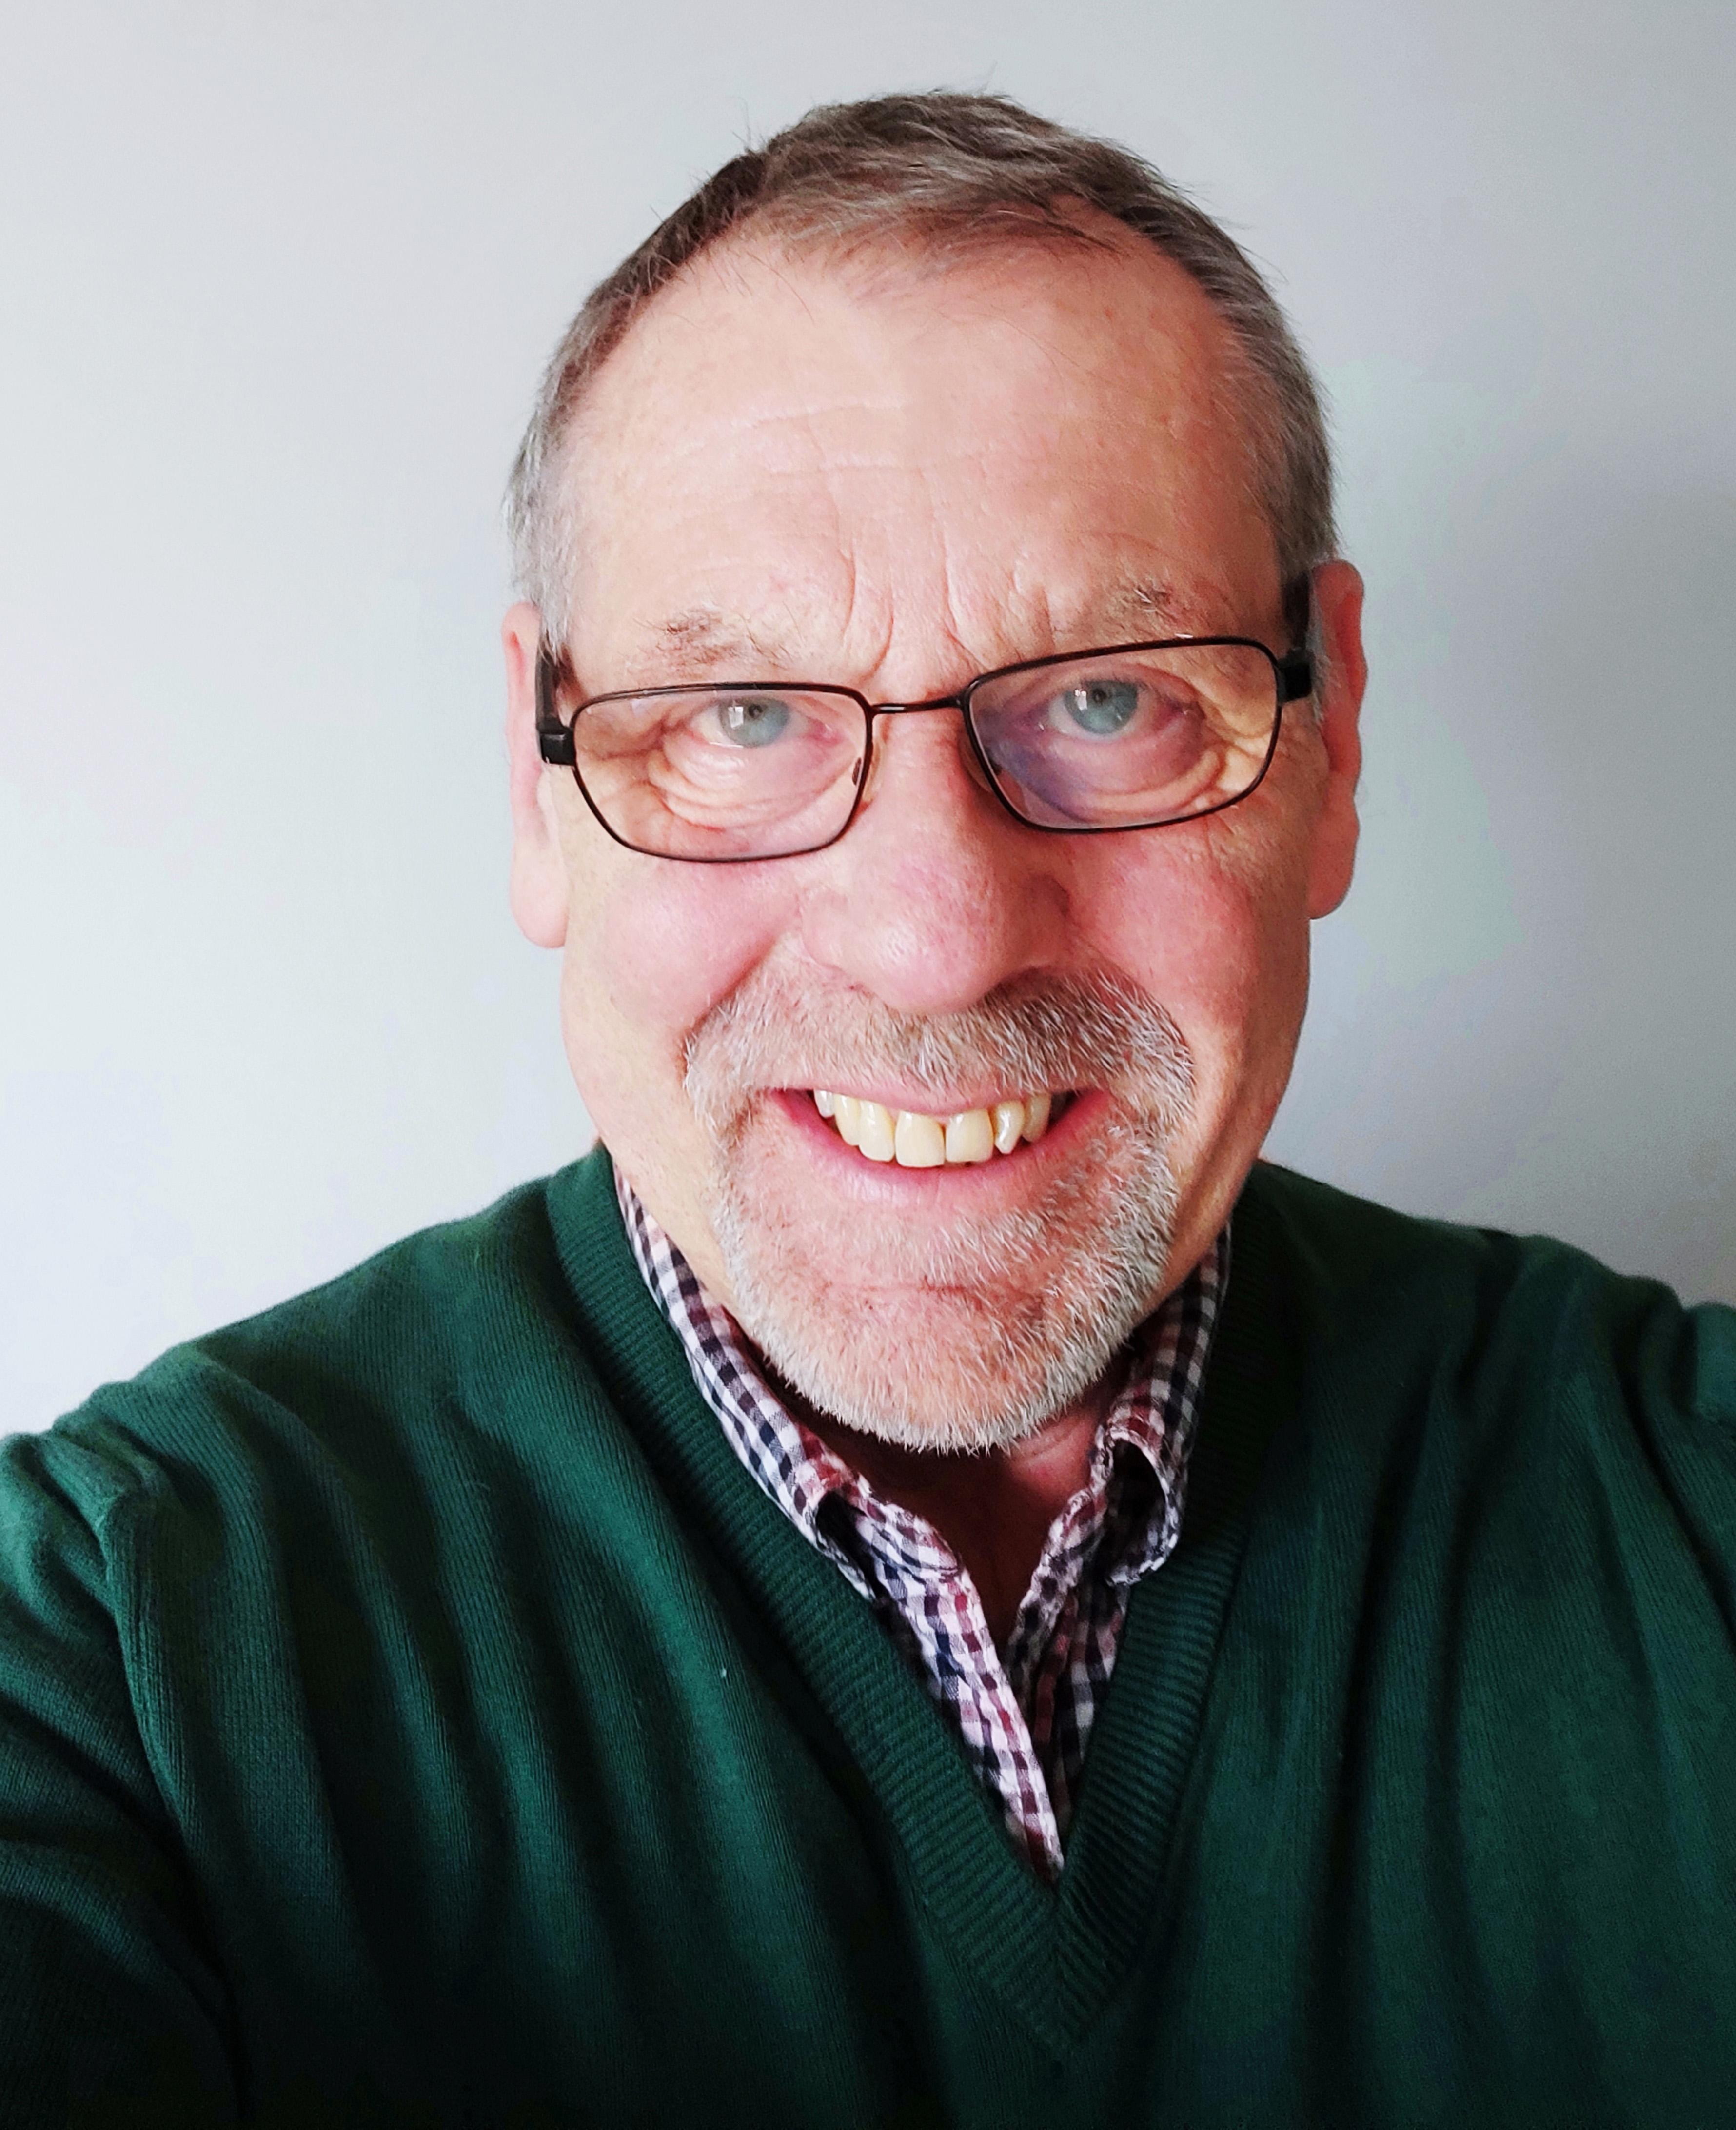 Nigel Crook our Remote sales and training specialist, Nigel is wearing a dark green jumper over a blue and red and white checked shirt 